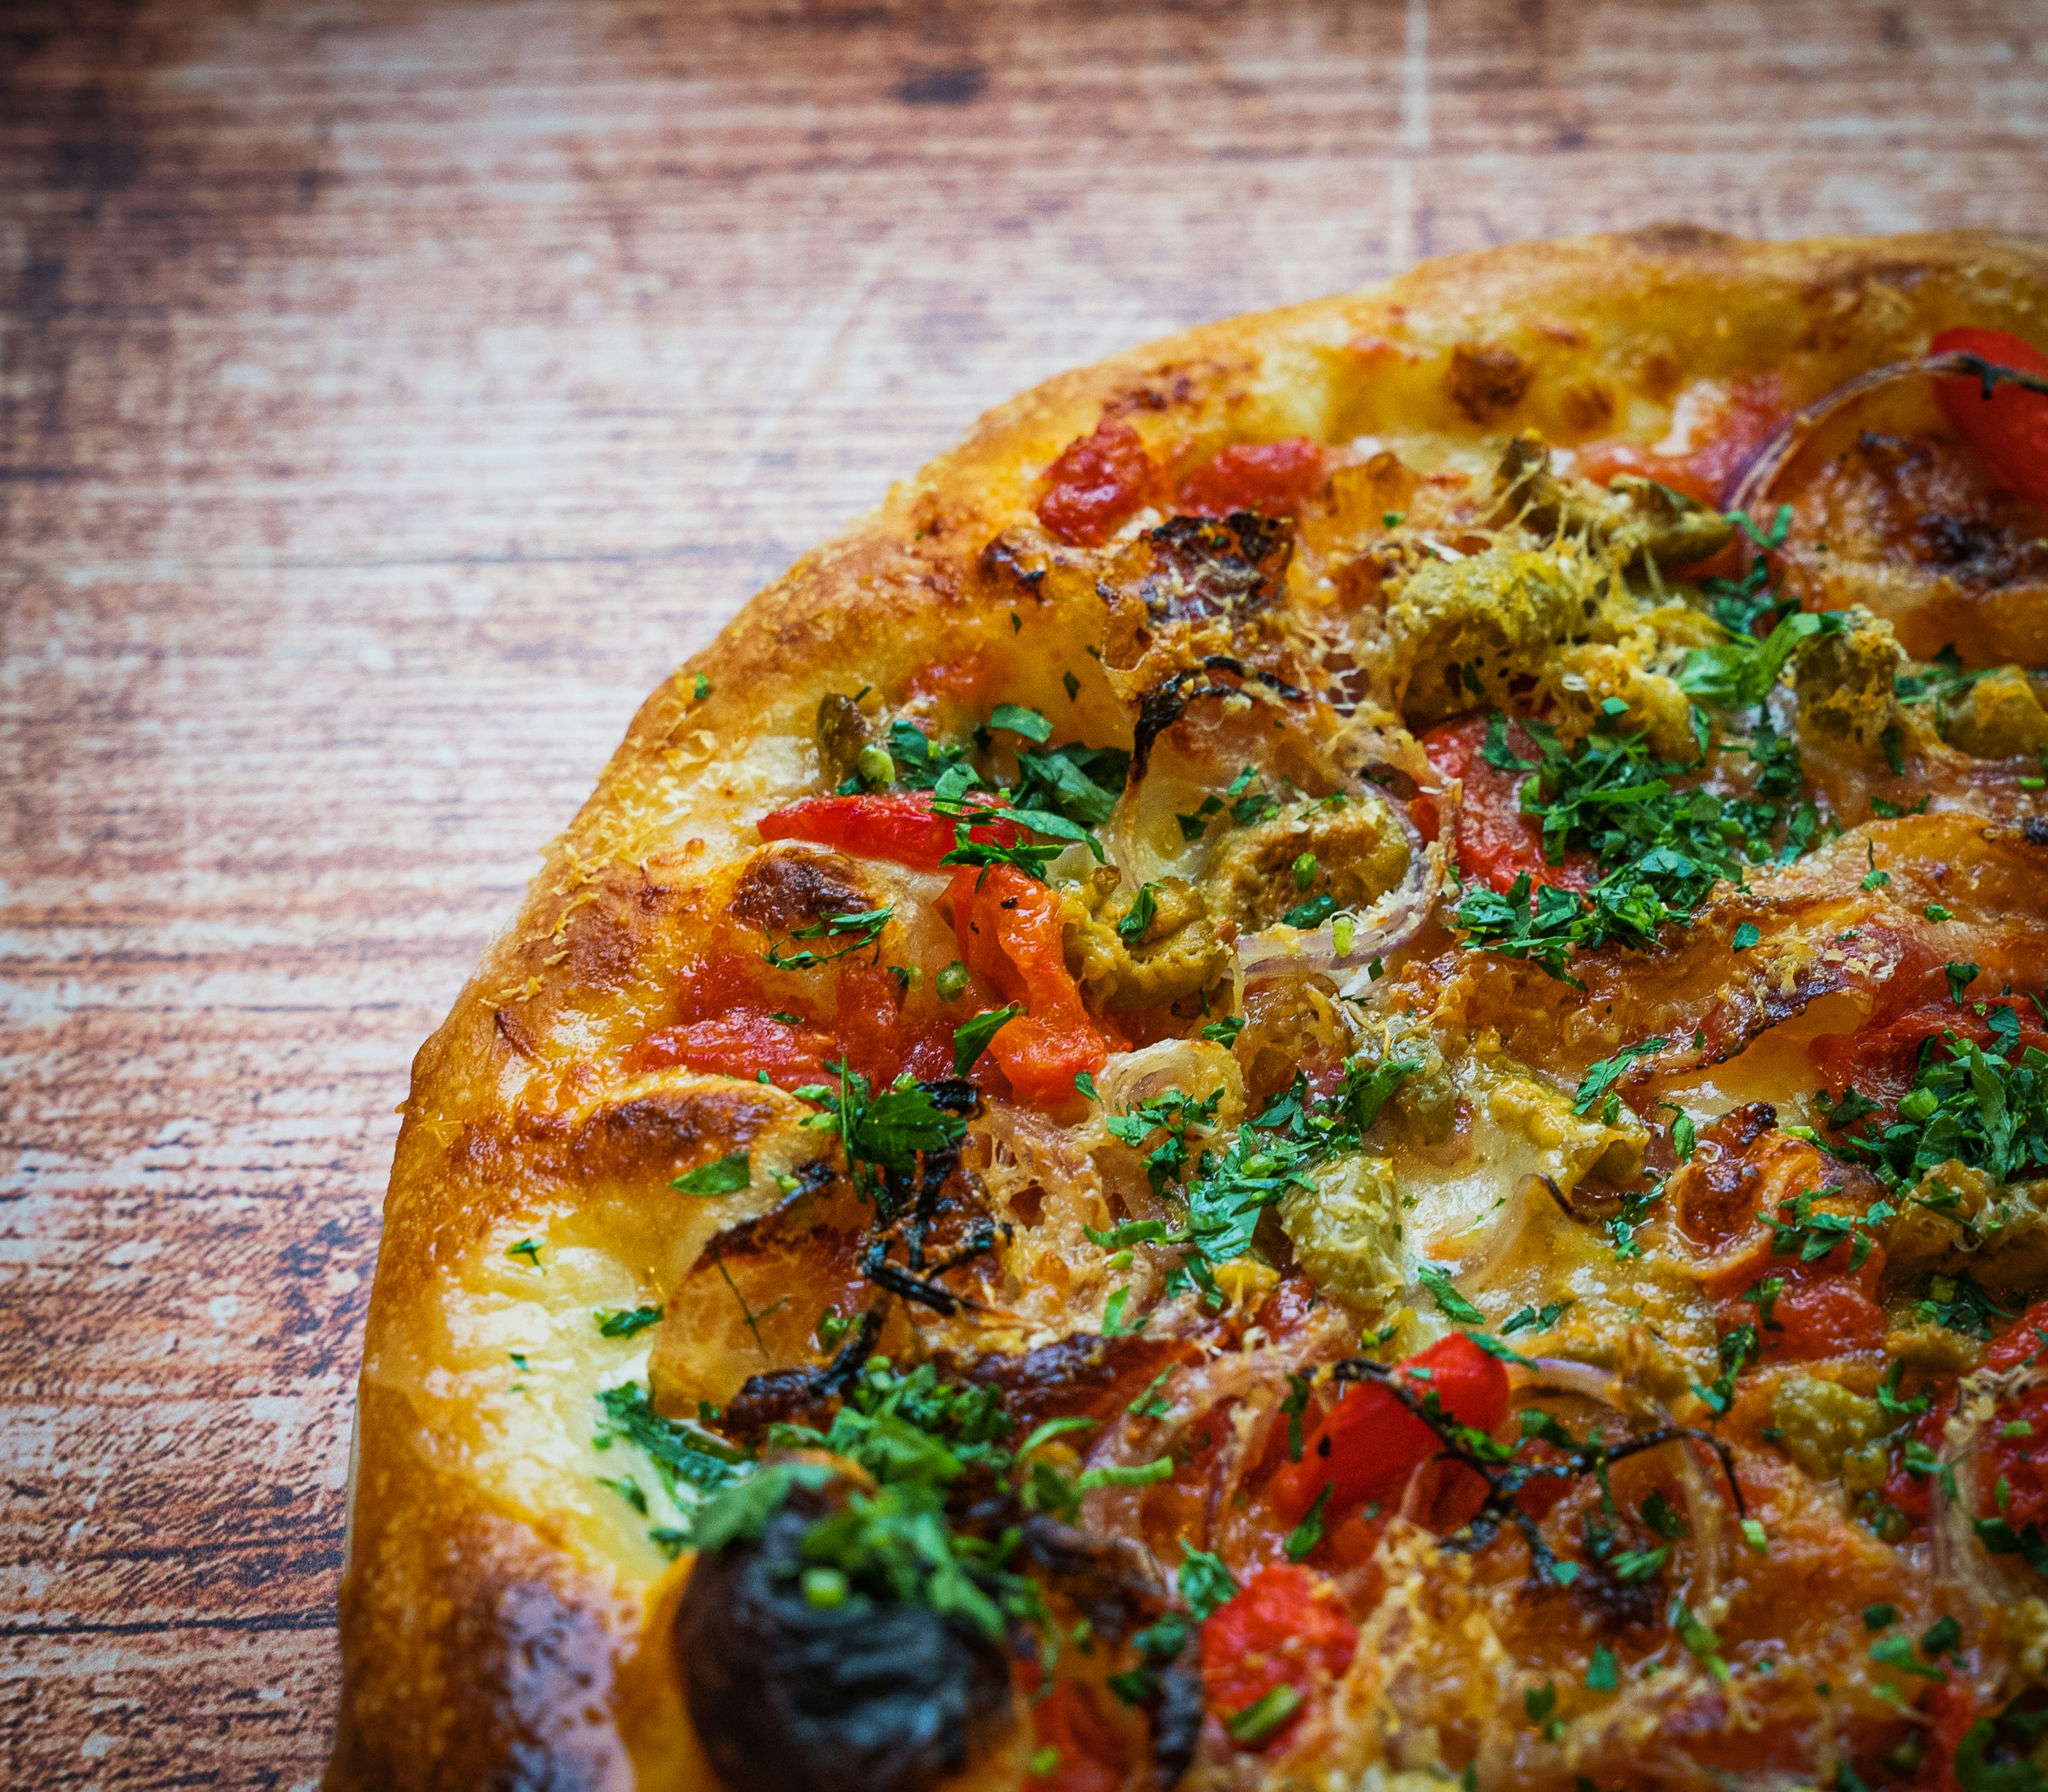 A cooked pizza with tomato, black olives, and parsley garnish.